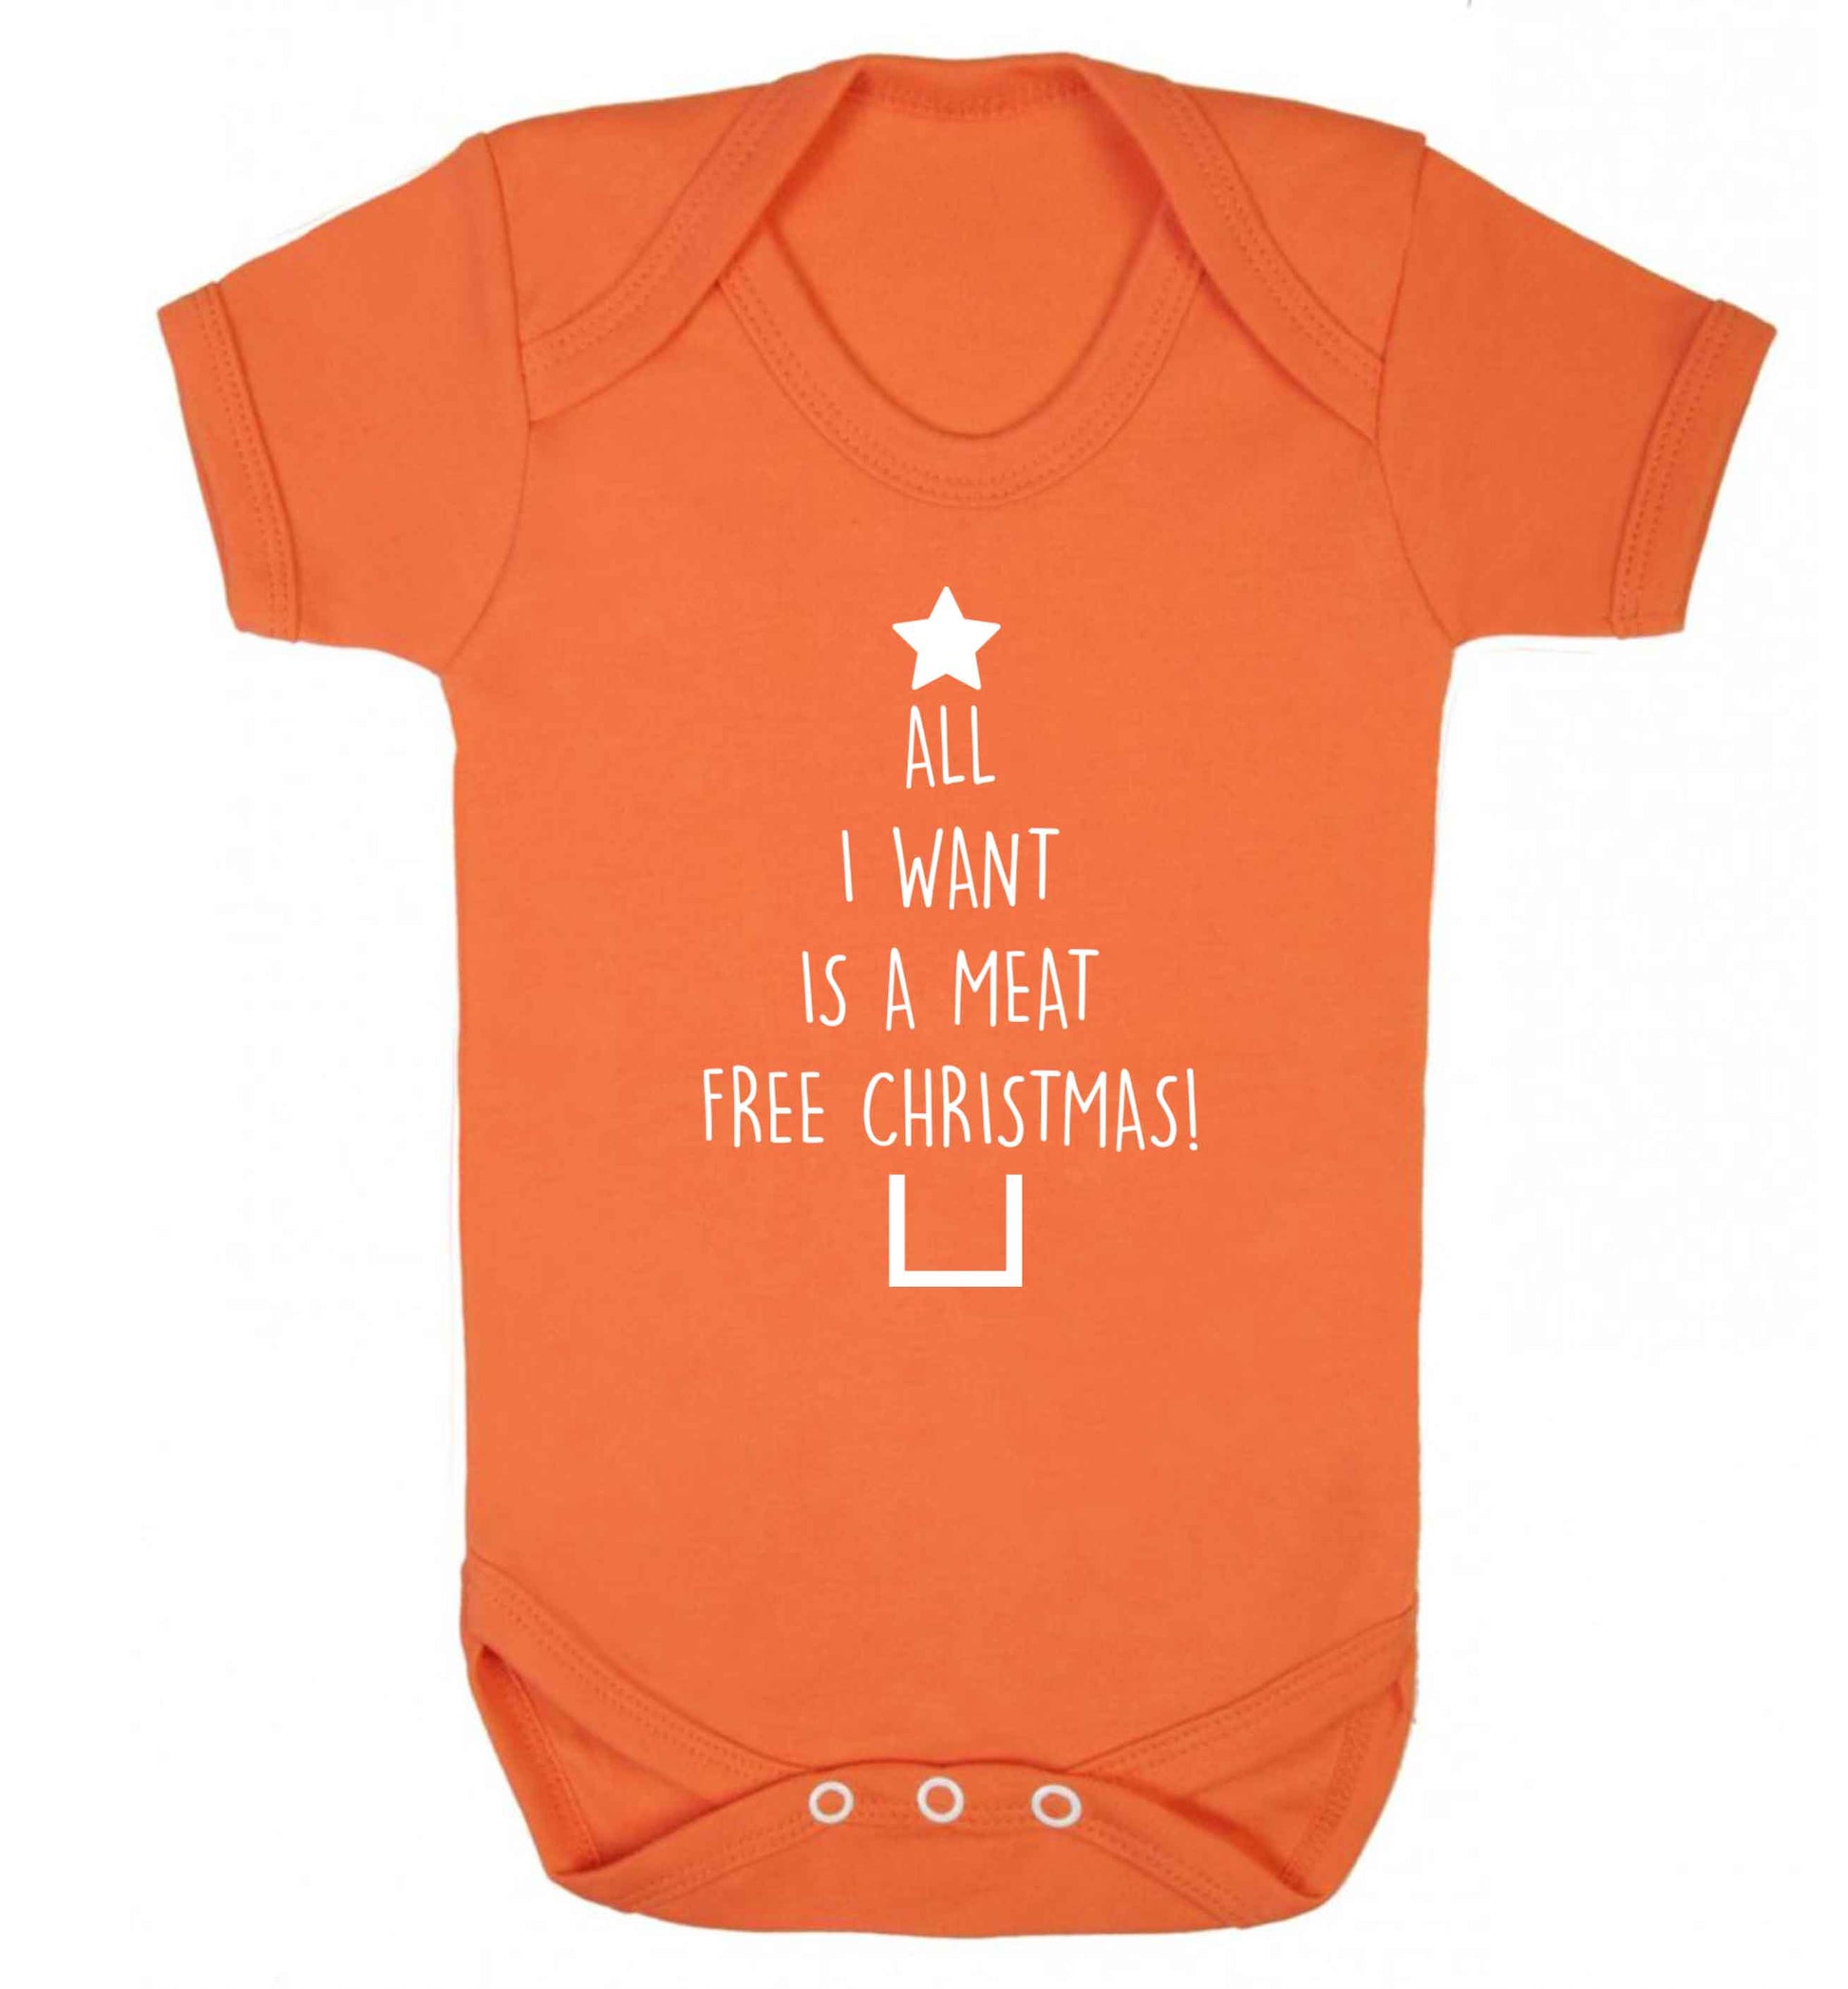 All I want is a meat free Christmas Baby Vest orange 18-24 months